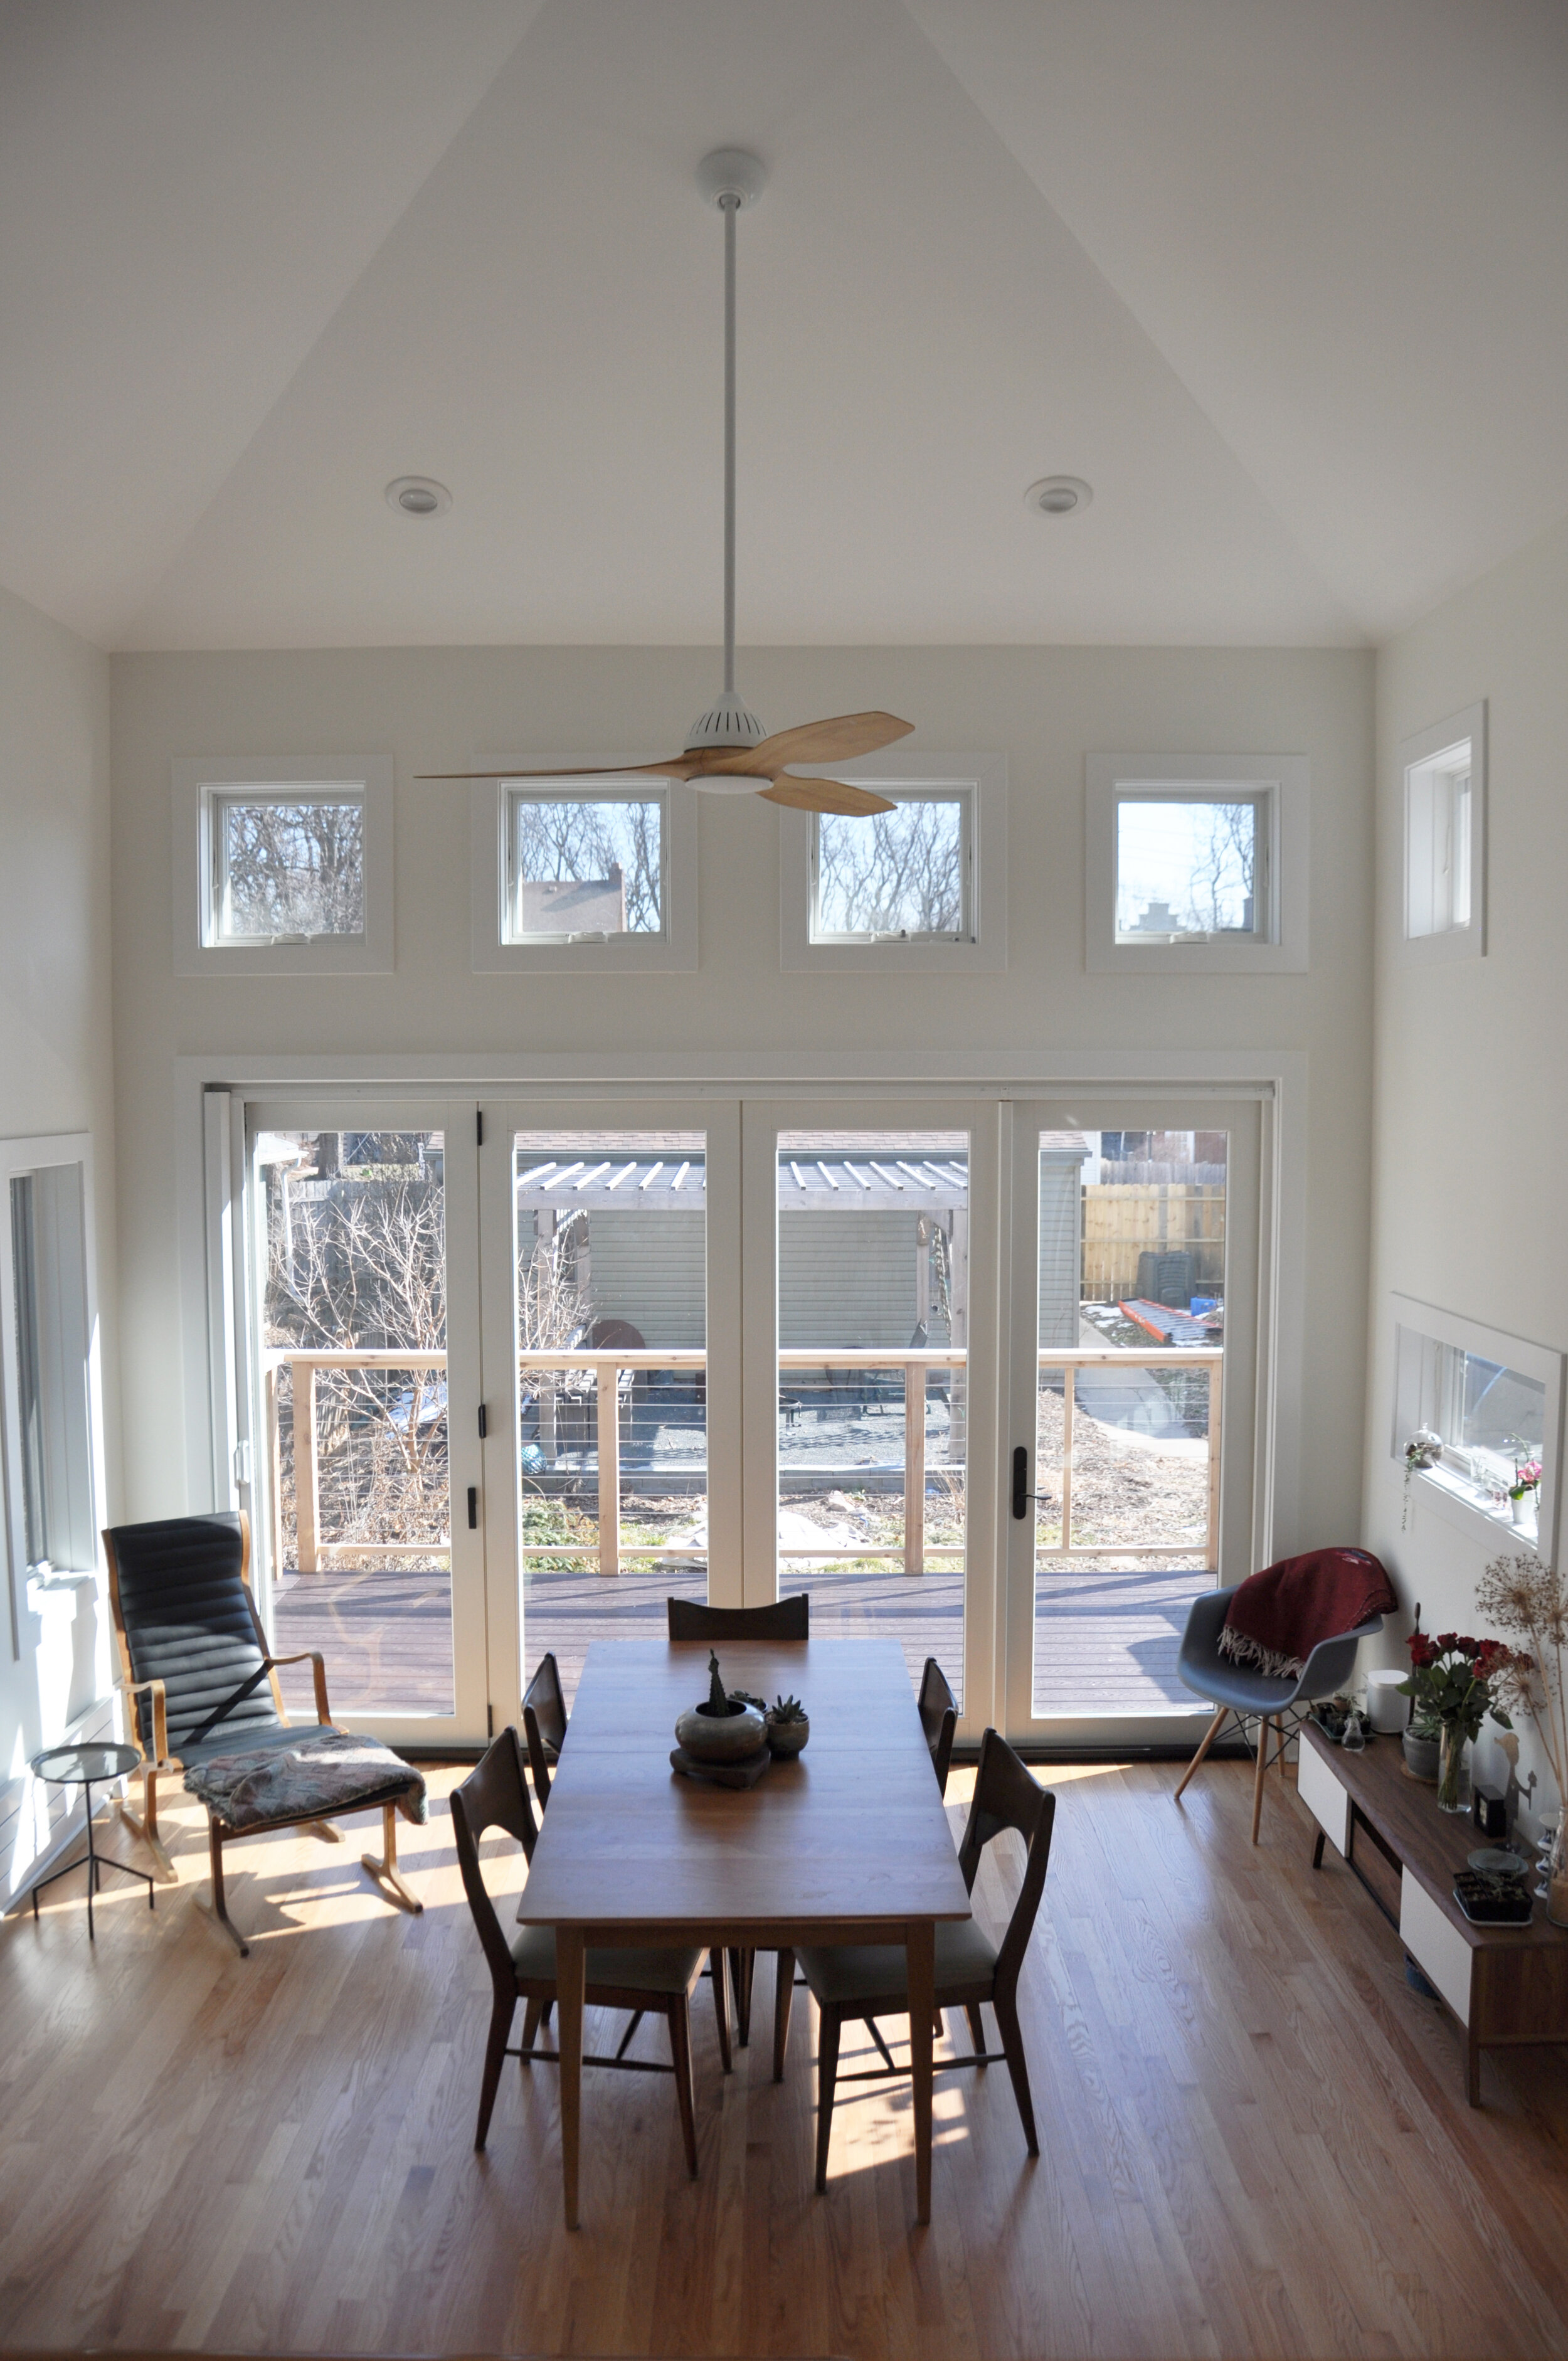 living space with tall ceilings, french doors, many windows